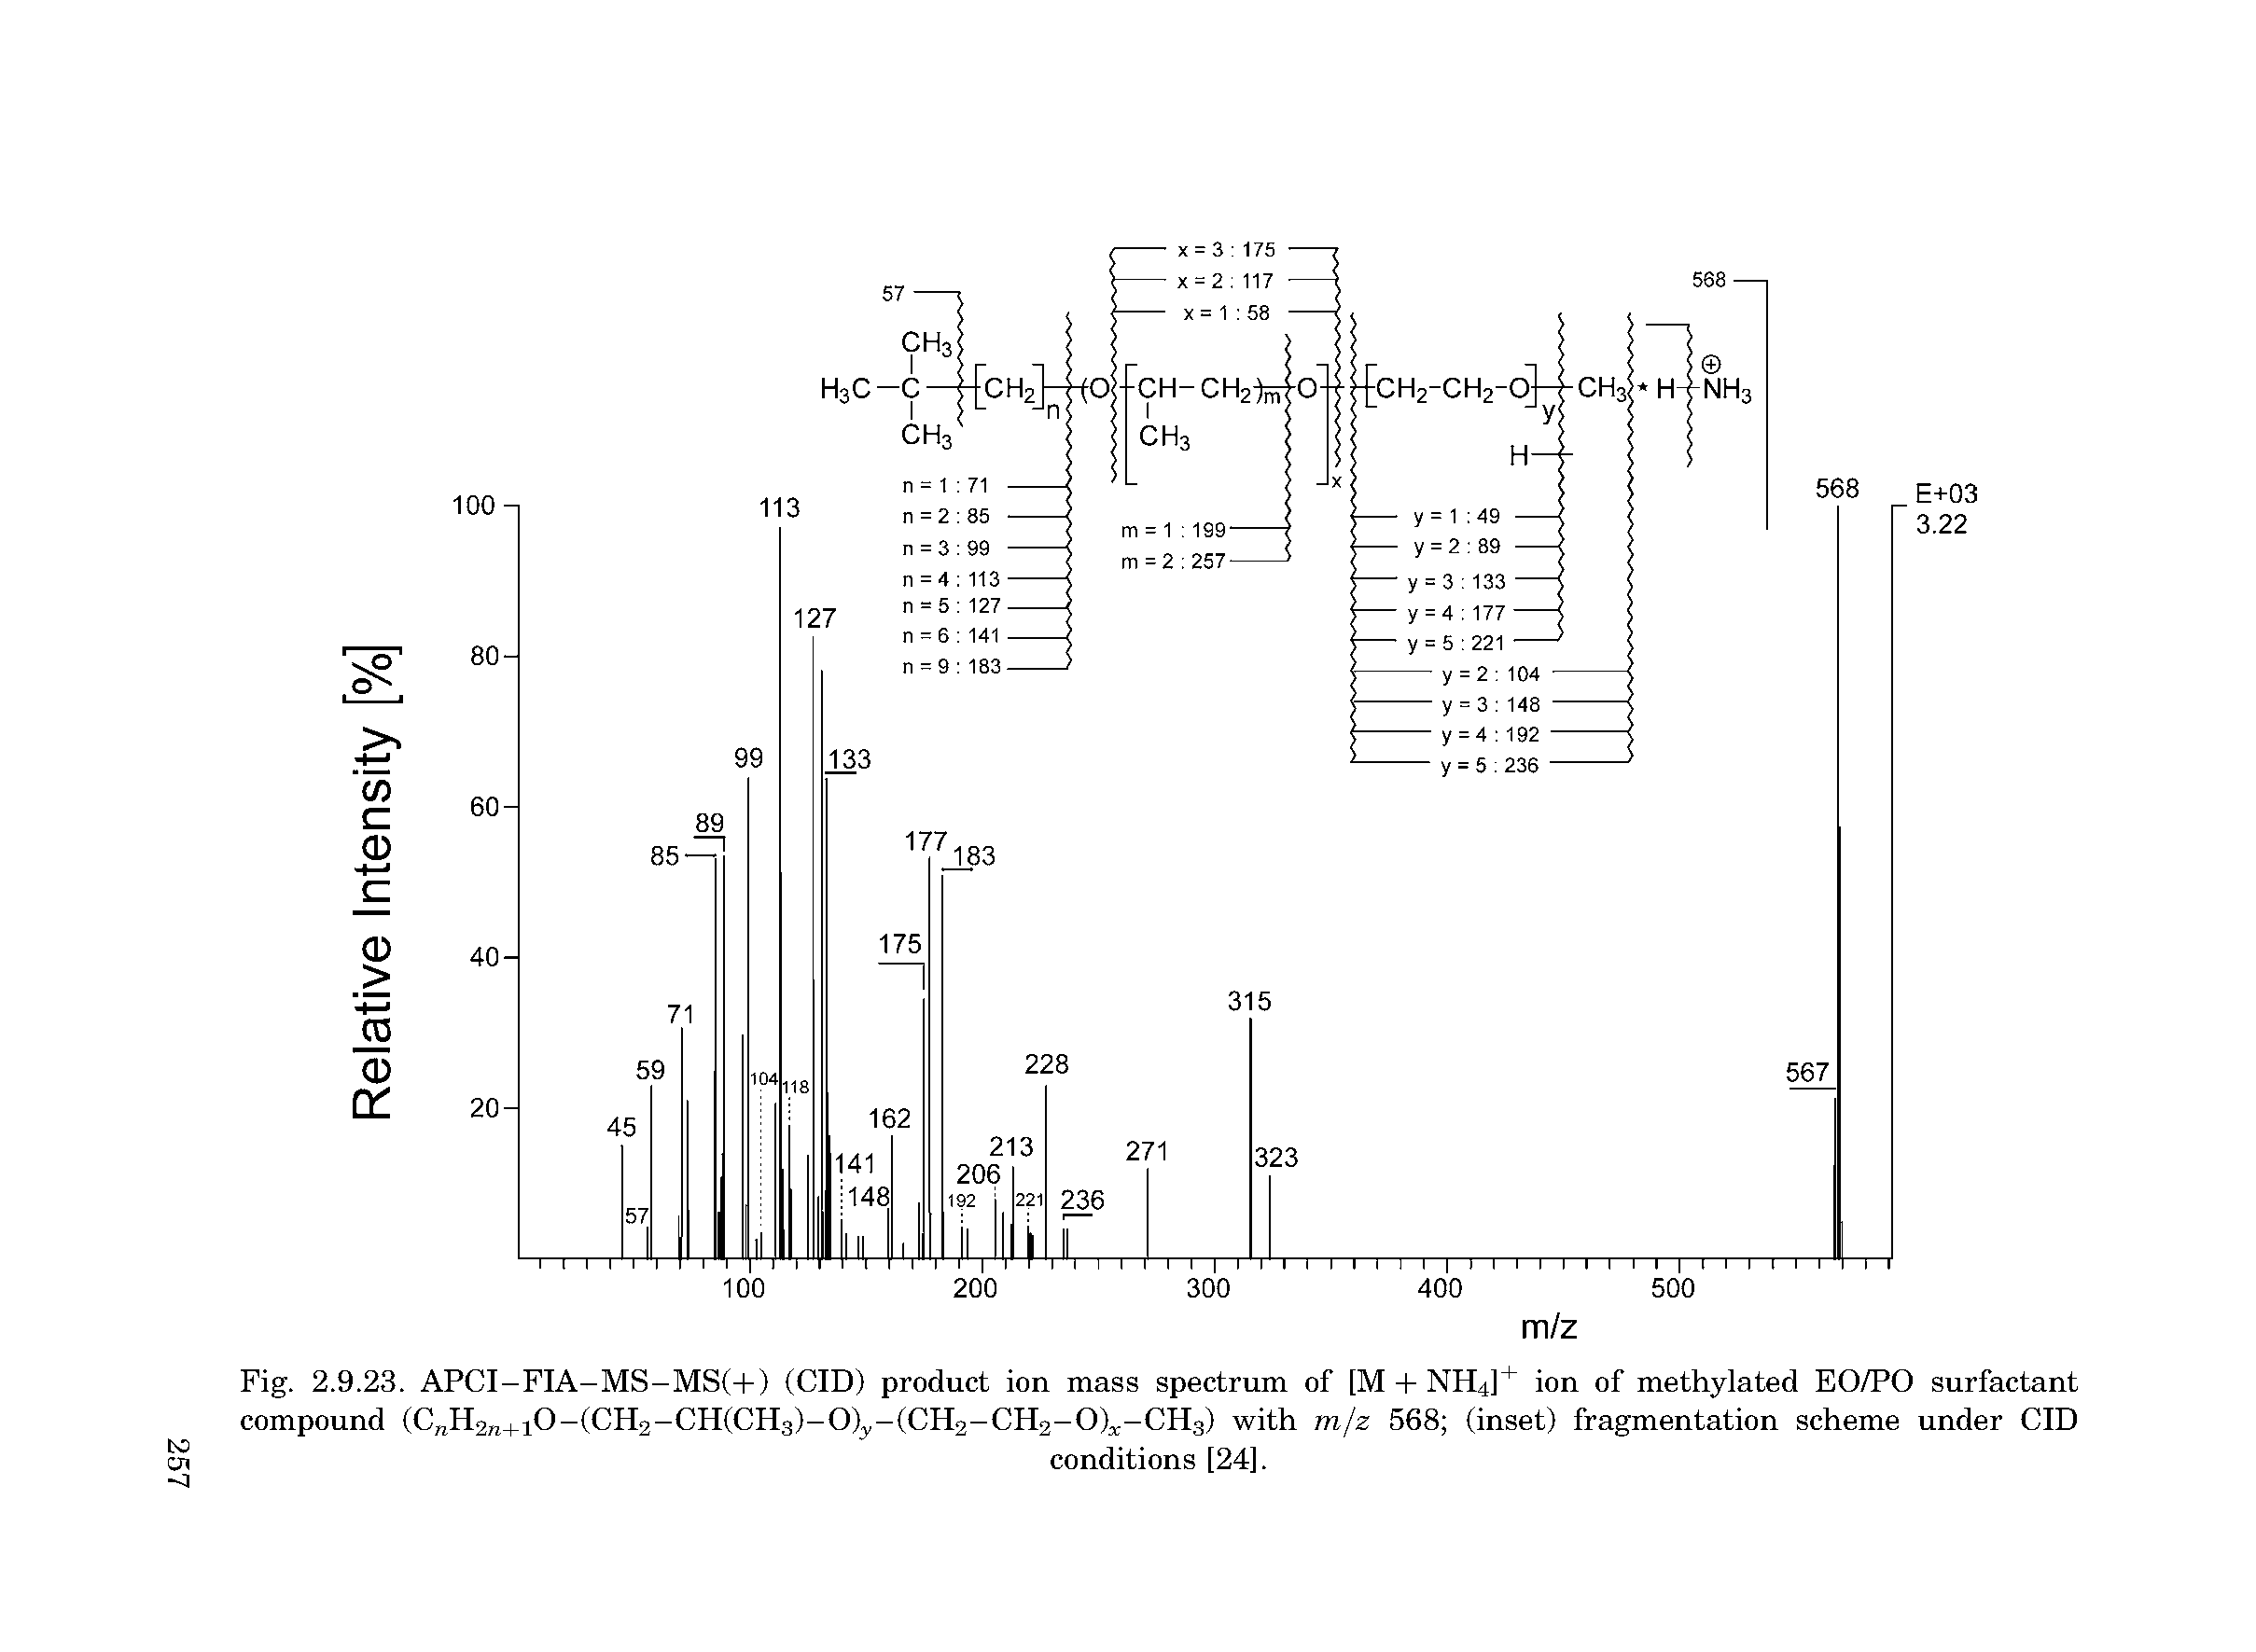 Fig. 2.9.23. APCI-FIA-MS-MS(+) (CID) product ion mass spectrum of [M + NH4]+ ion of methylated EO/PO surfactant compound (CnH2n+i0-(CH2-CH(CH3)-0) y-(CH2-CH2-0) l.-CH3) with m/z 568 (inset) fragmentation scheme under CID ot conditions [24],...